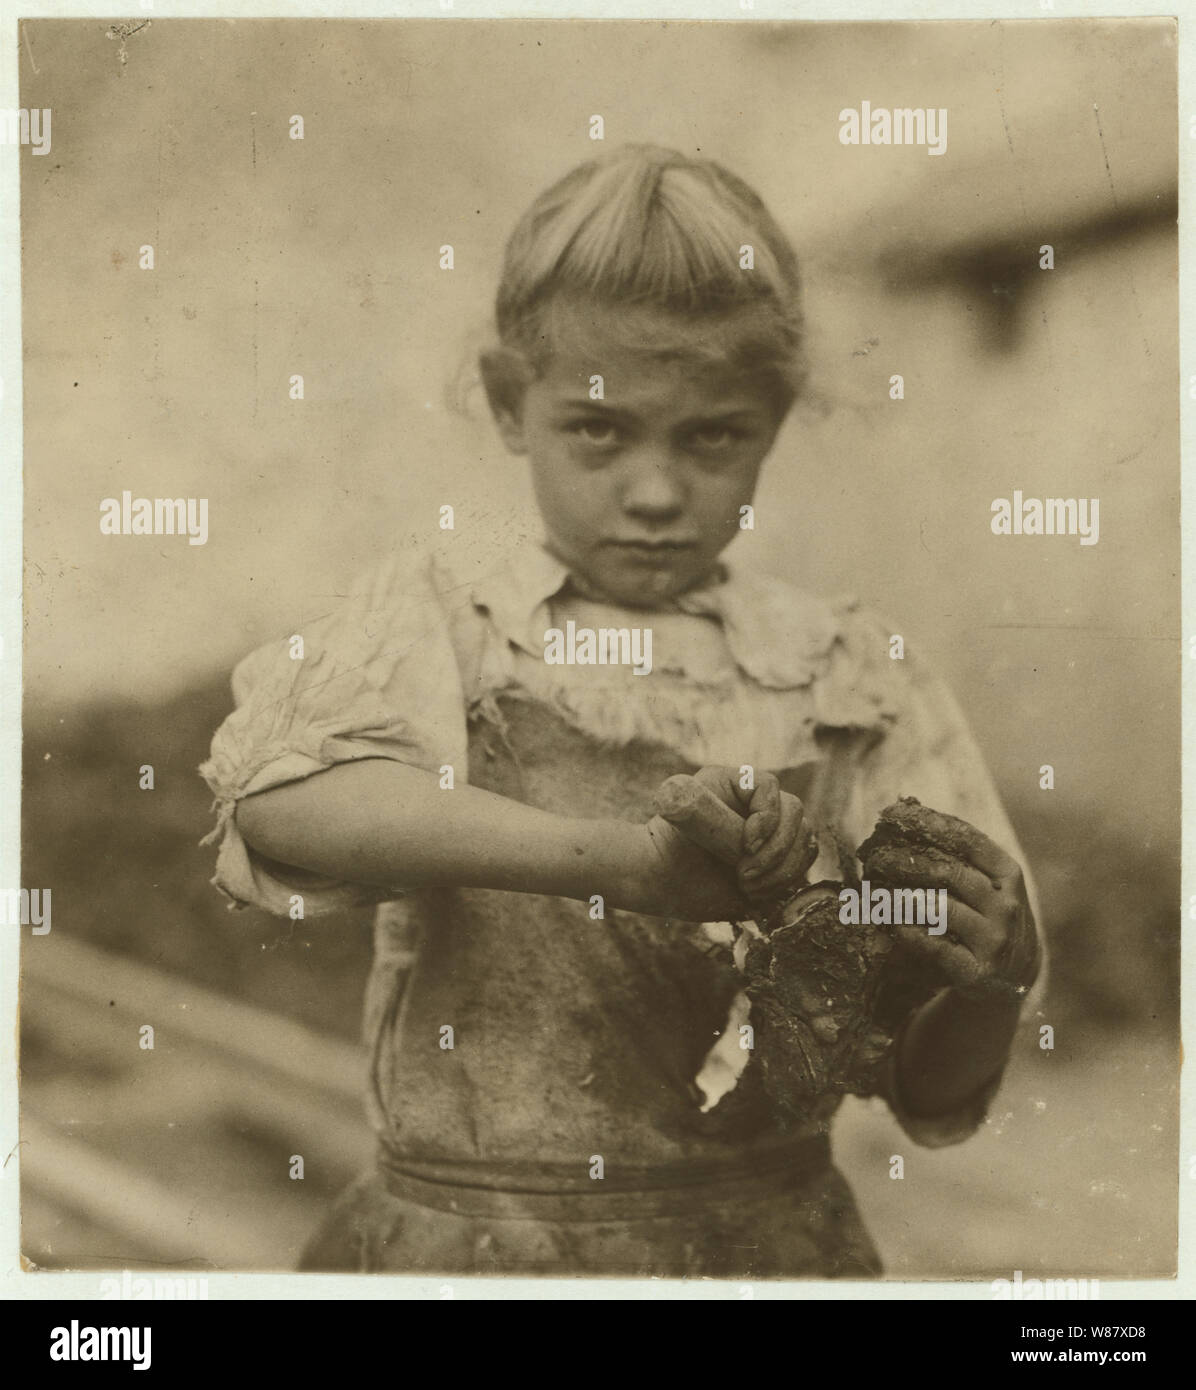 7-year old Rosie. Regular oyster shucker. Her second year at it. Illiterate. Works all day. Shucks only a few pots a day. (Showing process) Varn & Platt Canning Co. Stock Photo